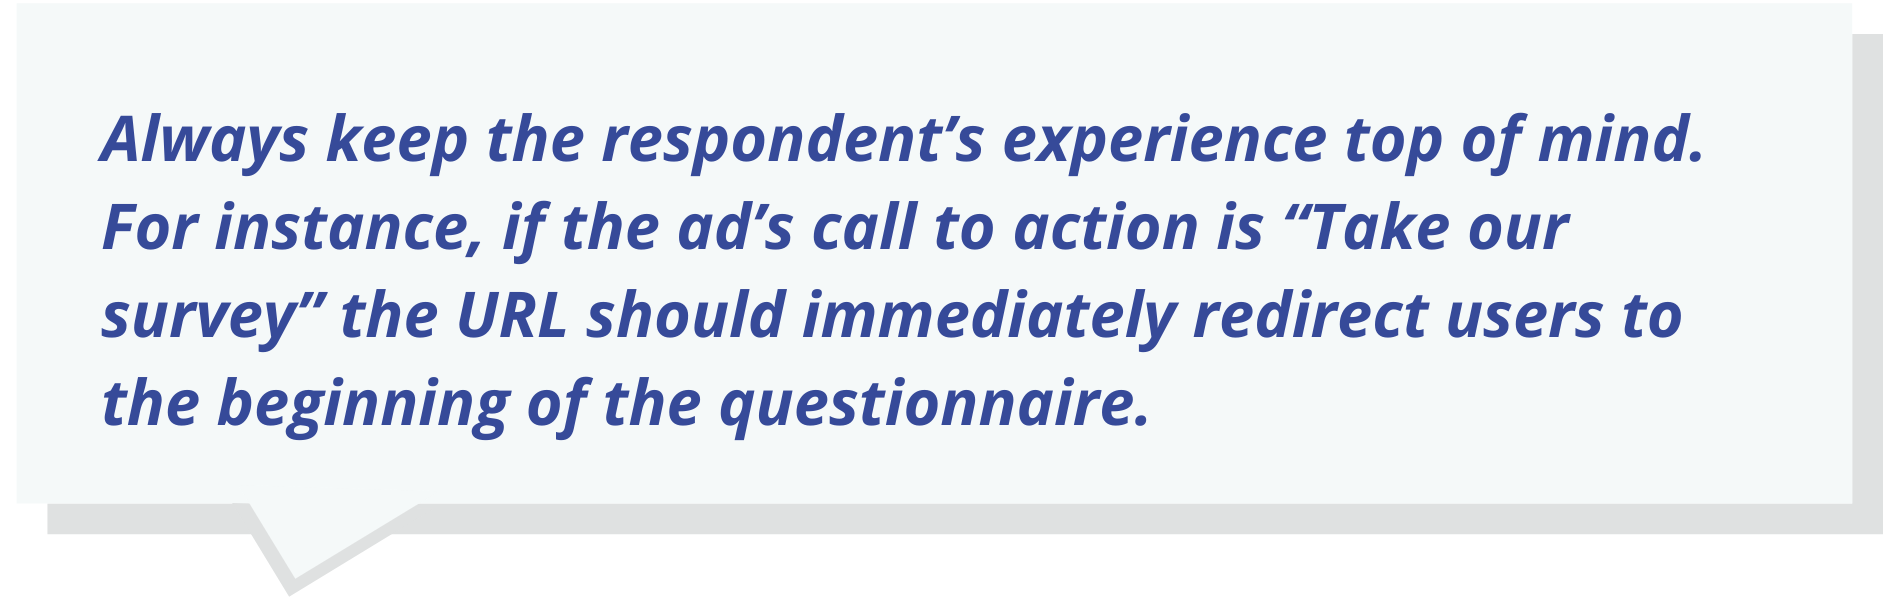 Always keep the respondent’s experience top of mind. For instance, if the ad’s call to action is “Take our survey” the URL should immediately redirect users to the beginning of the questionnaire.